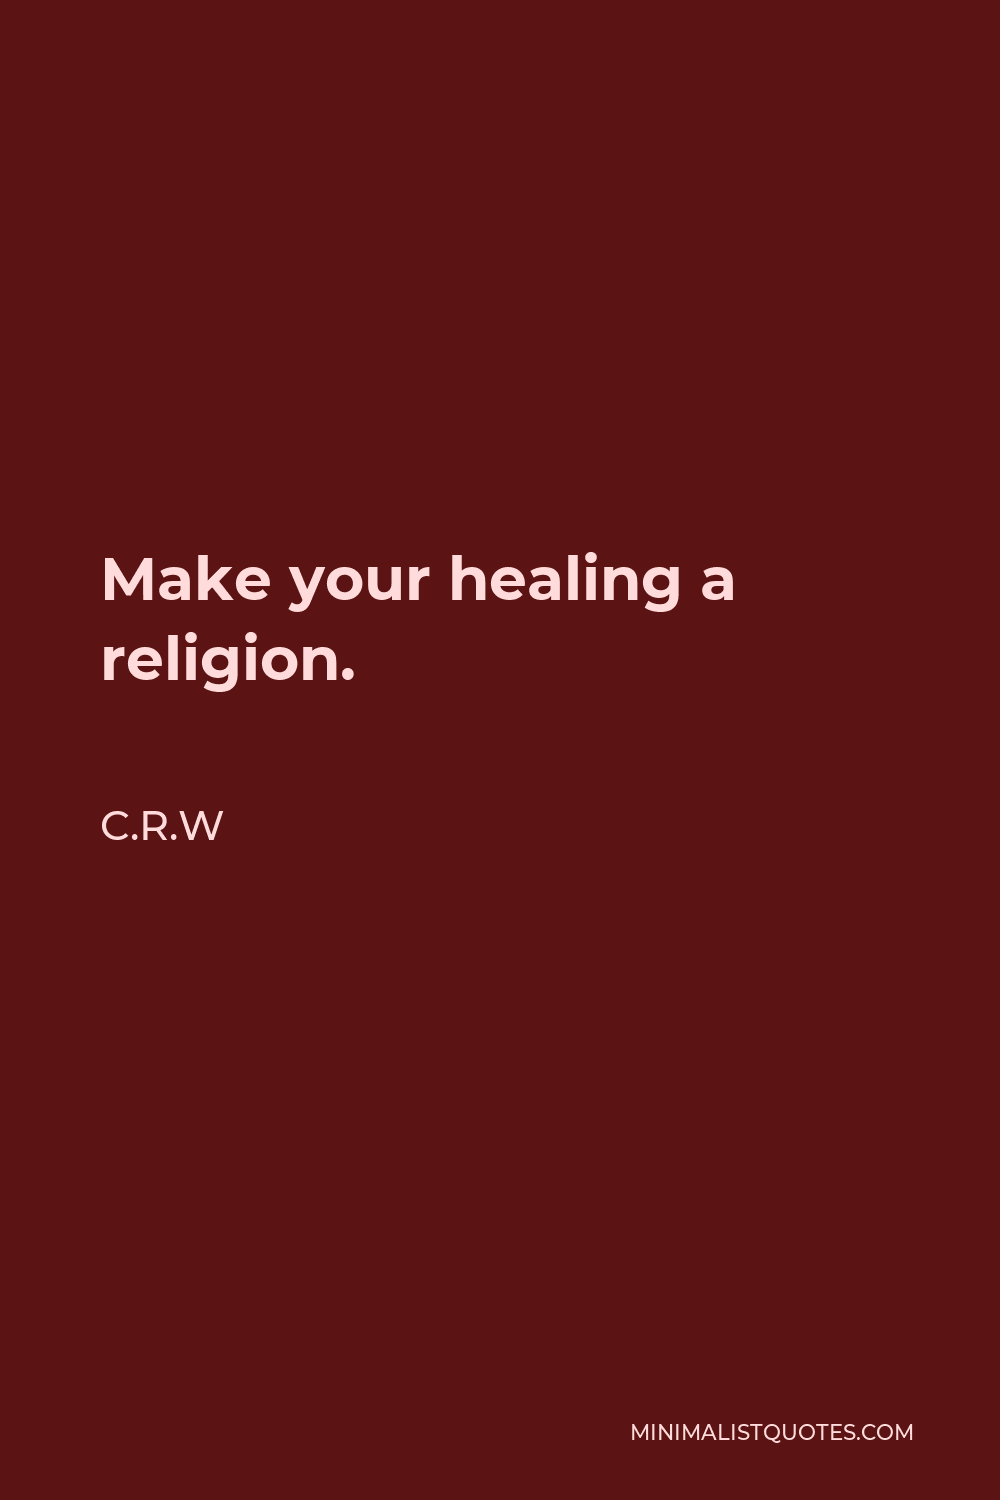 C.R.W Quote - Make your healing a religion.